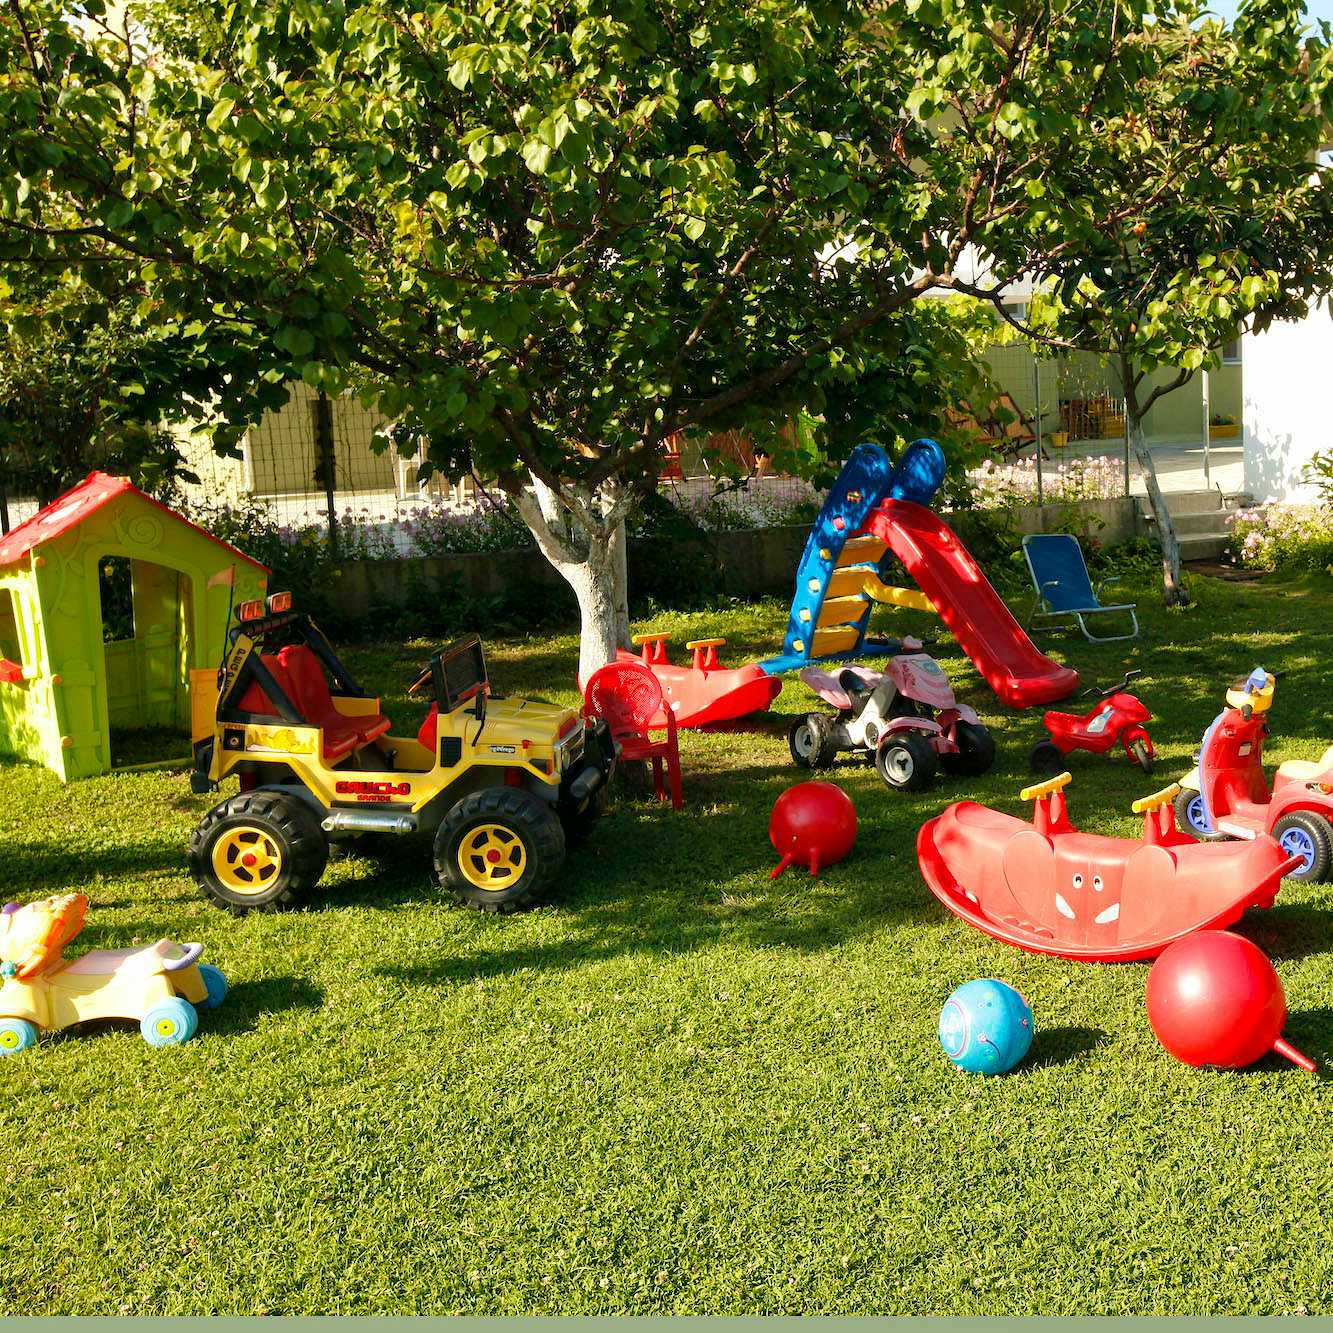 Photo Caption: Let the children roam freely in our big garden with a playground